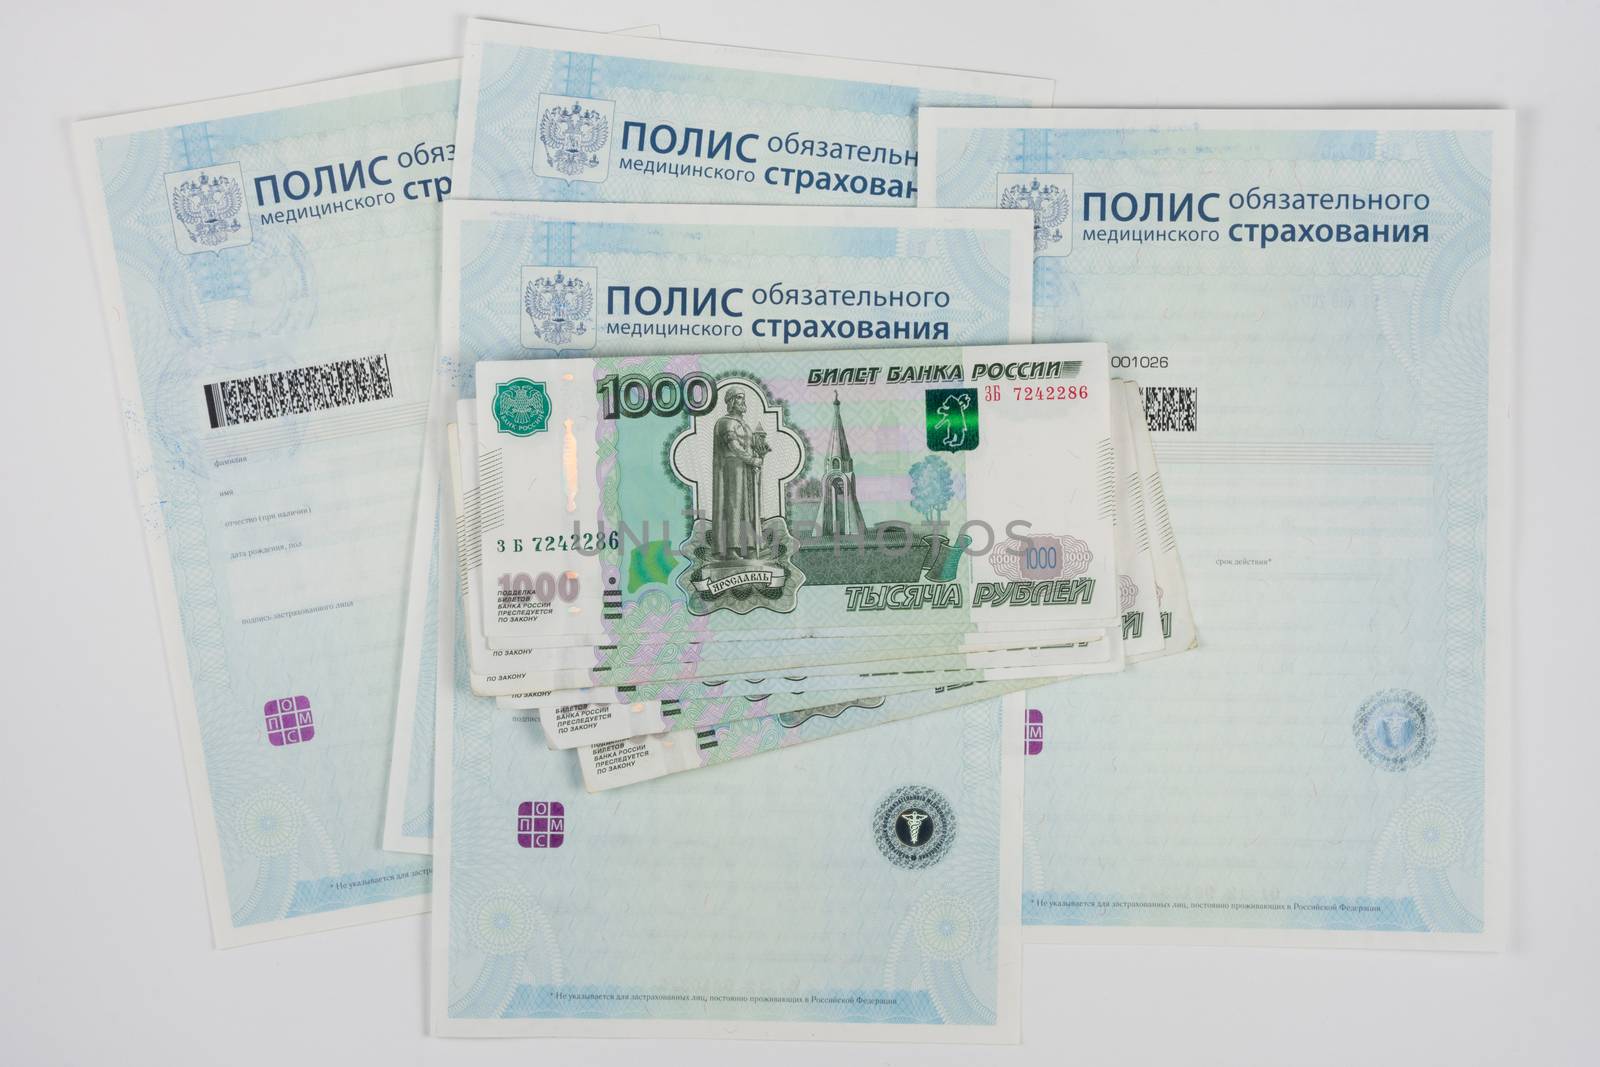 Russian money is on the policy of compulsory medical insurance, white background